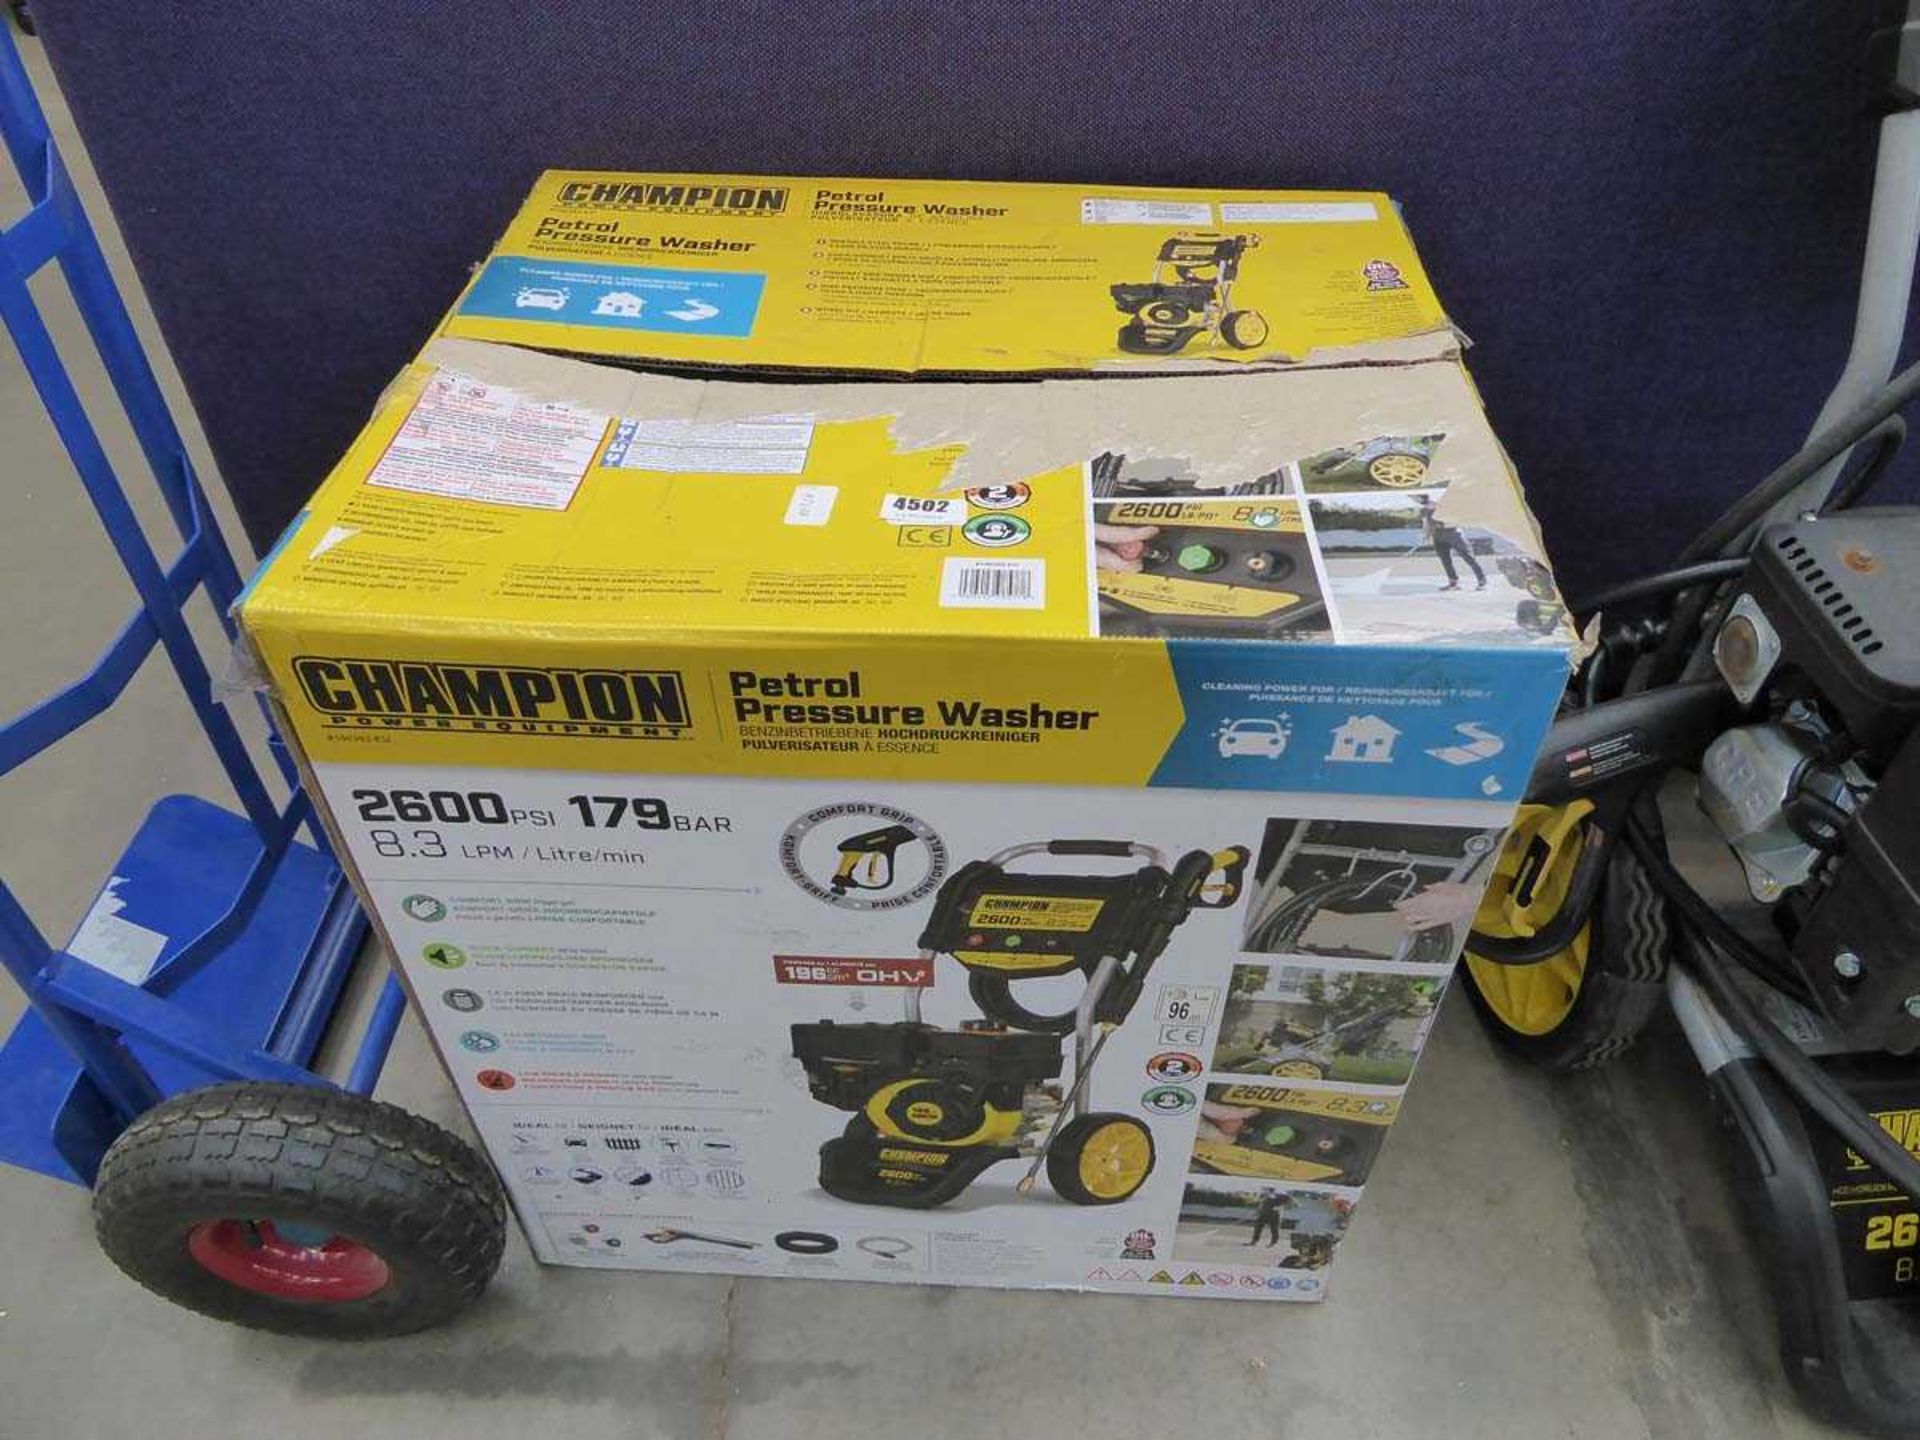 Champion boxed petrol powered pressure washer